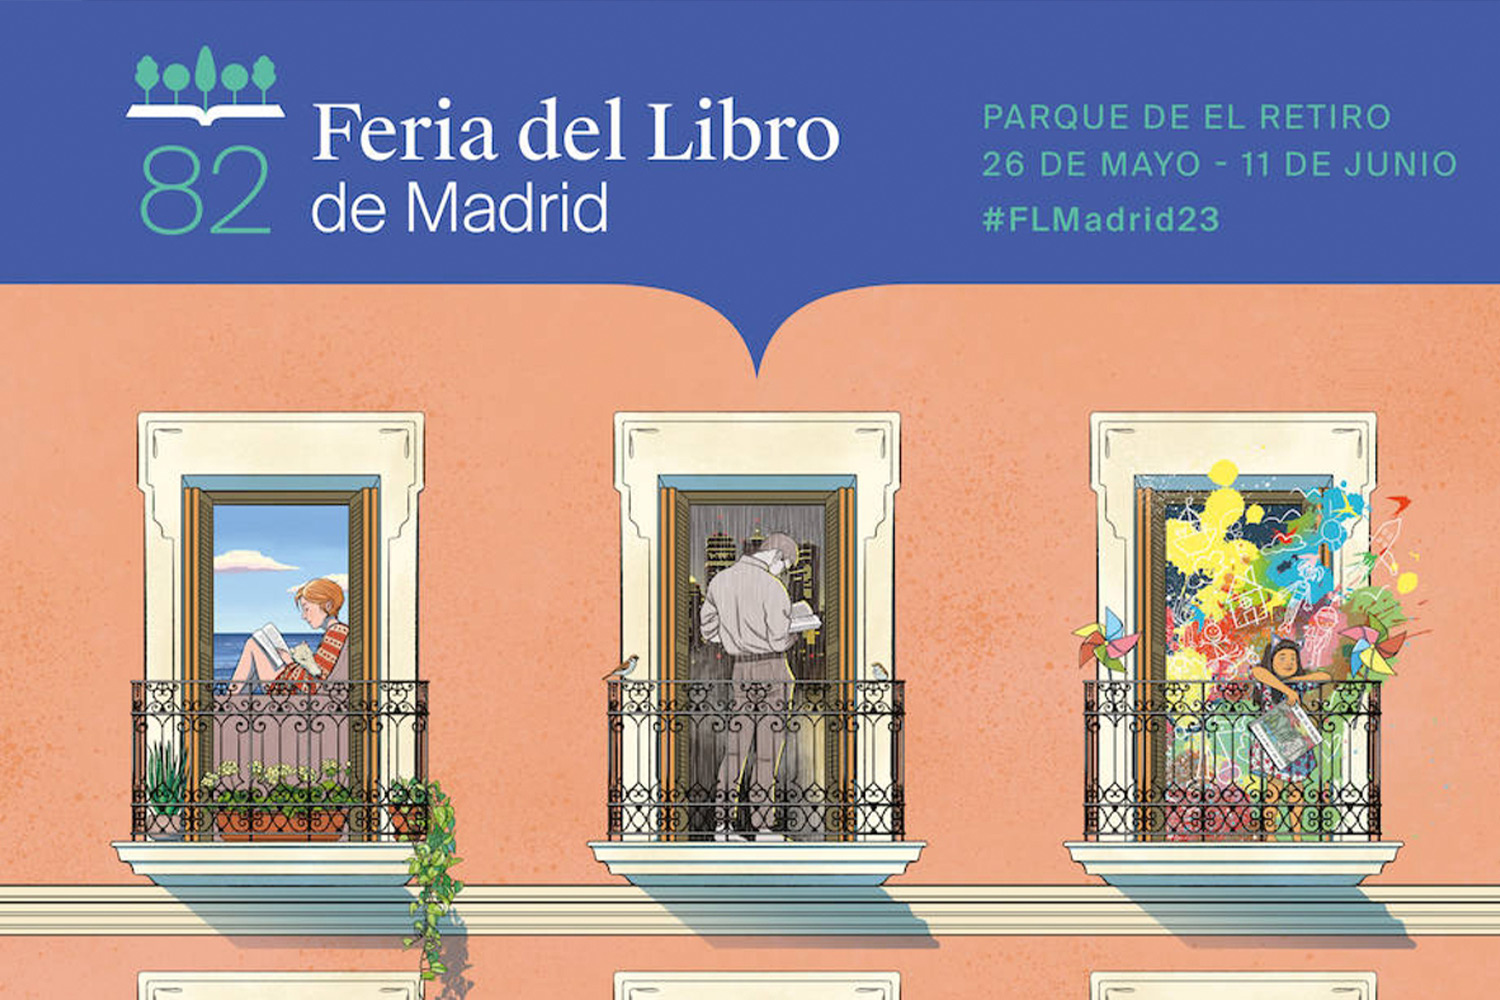 The poster for the 82nd Madrid Book Fair pays tribute to Madrid and the diversity of its reading community